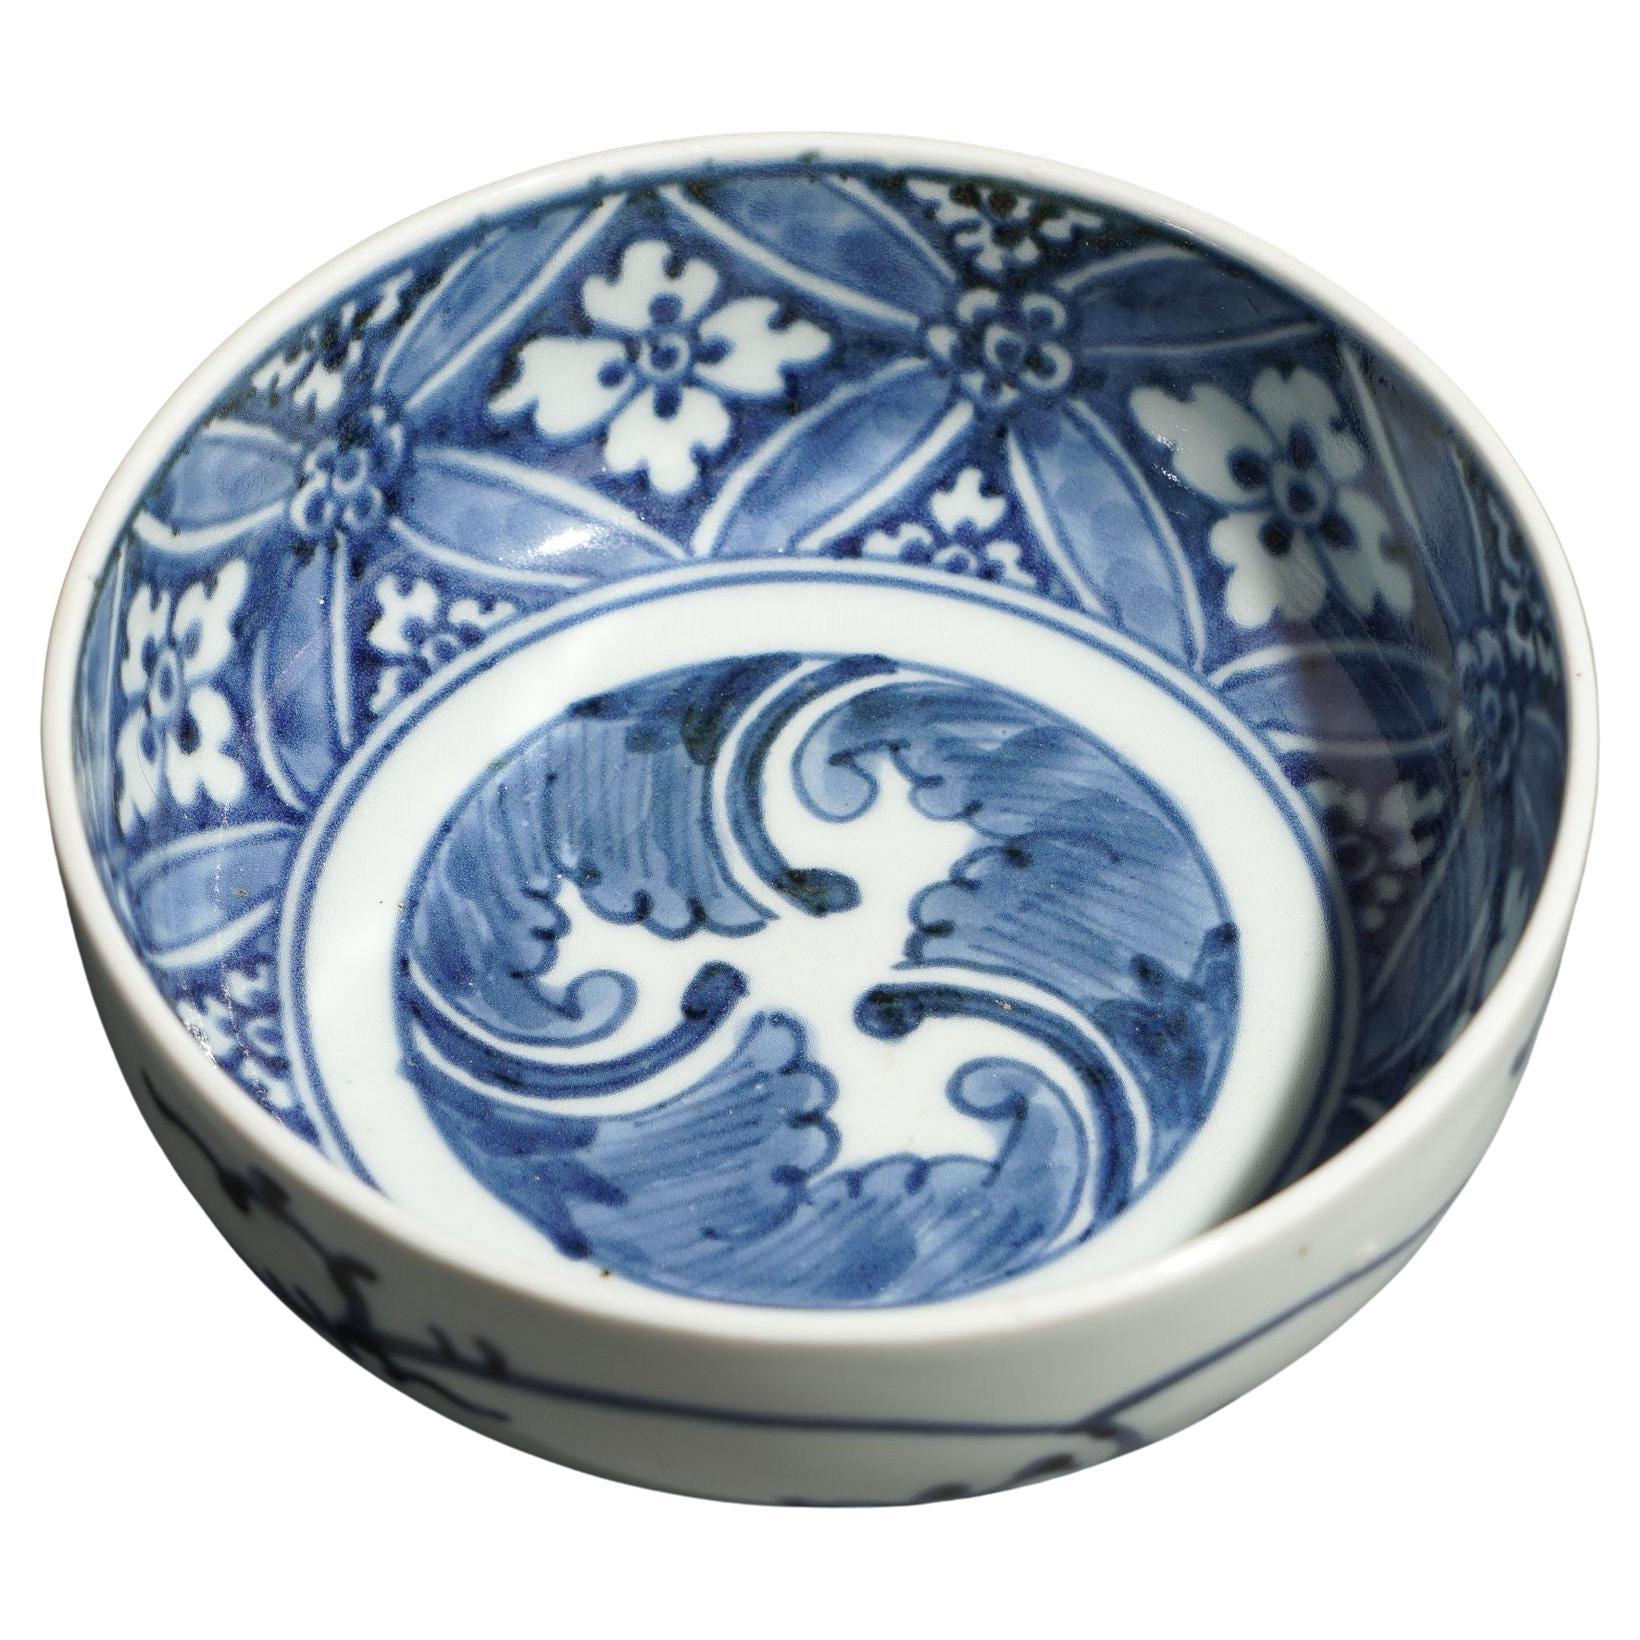 Japanese porcelain footed bowl with cobalt decoration, 1800's